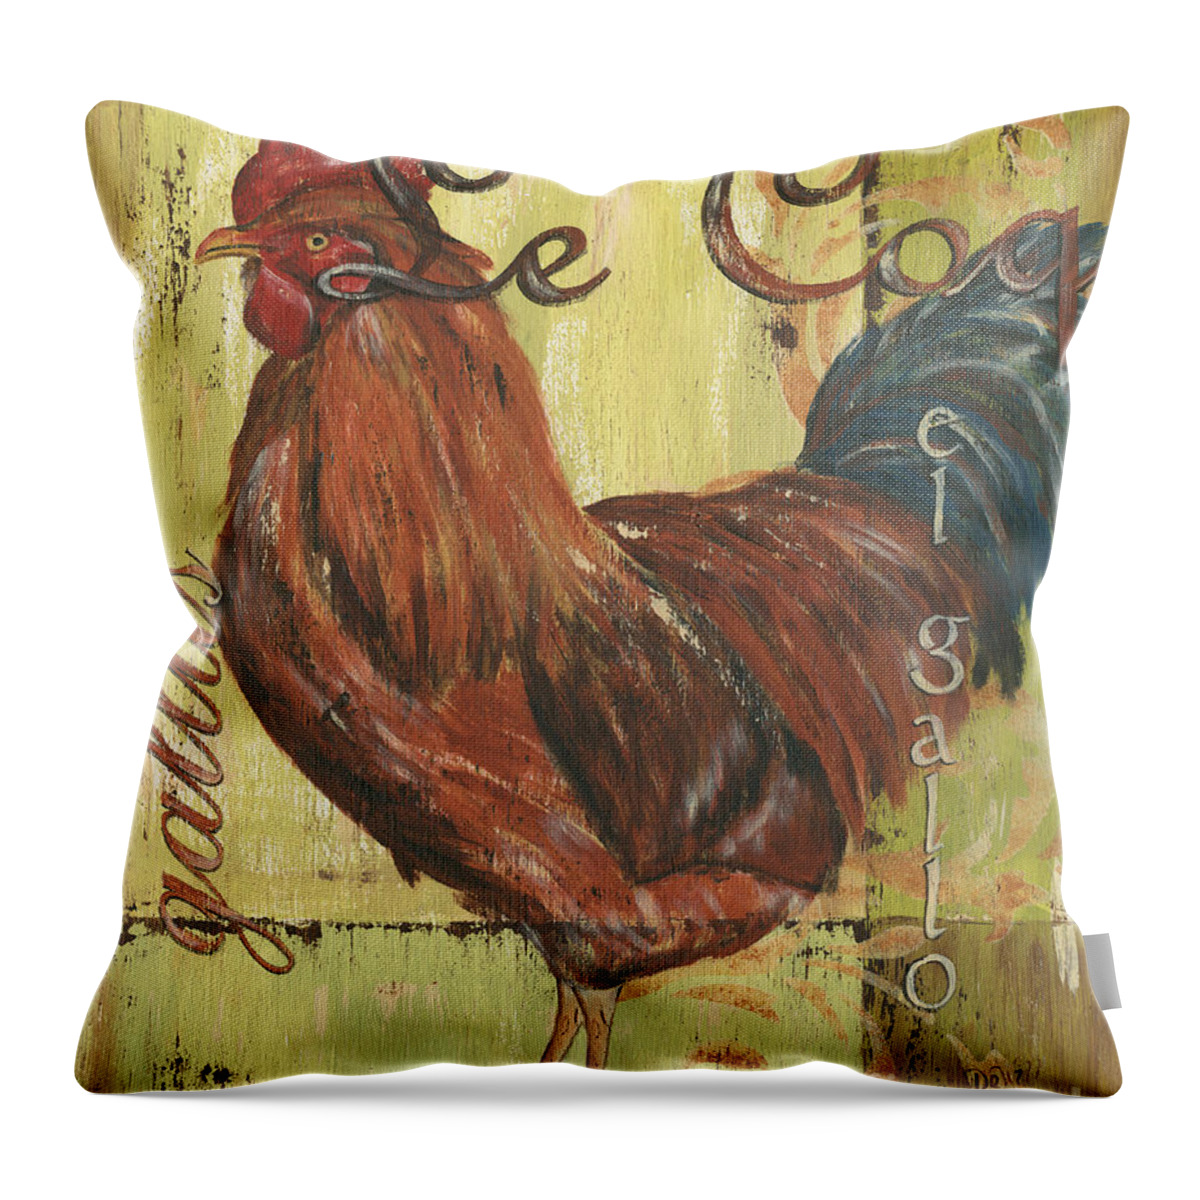 Rooster Throw Pillow featuring the painting Le Coq by Debbie DeWitt